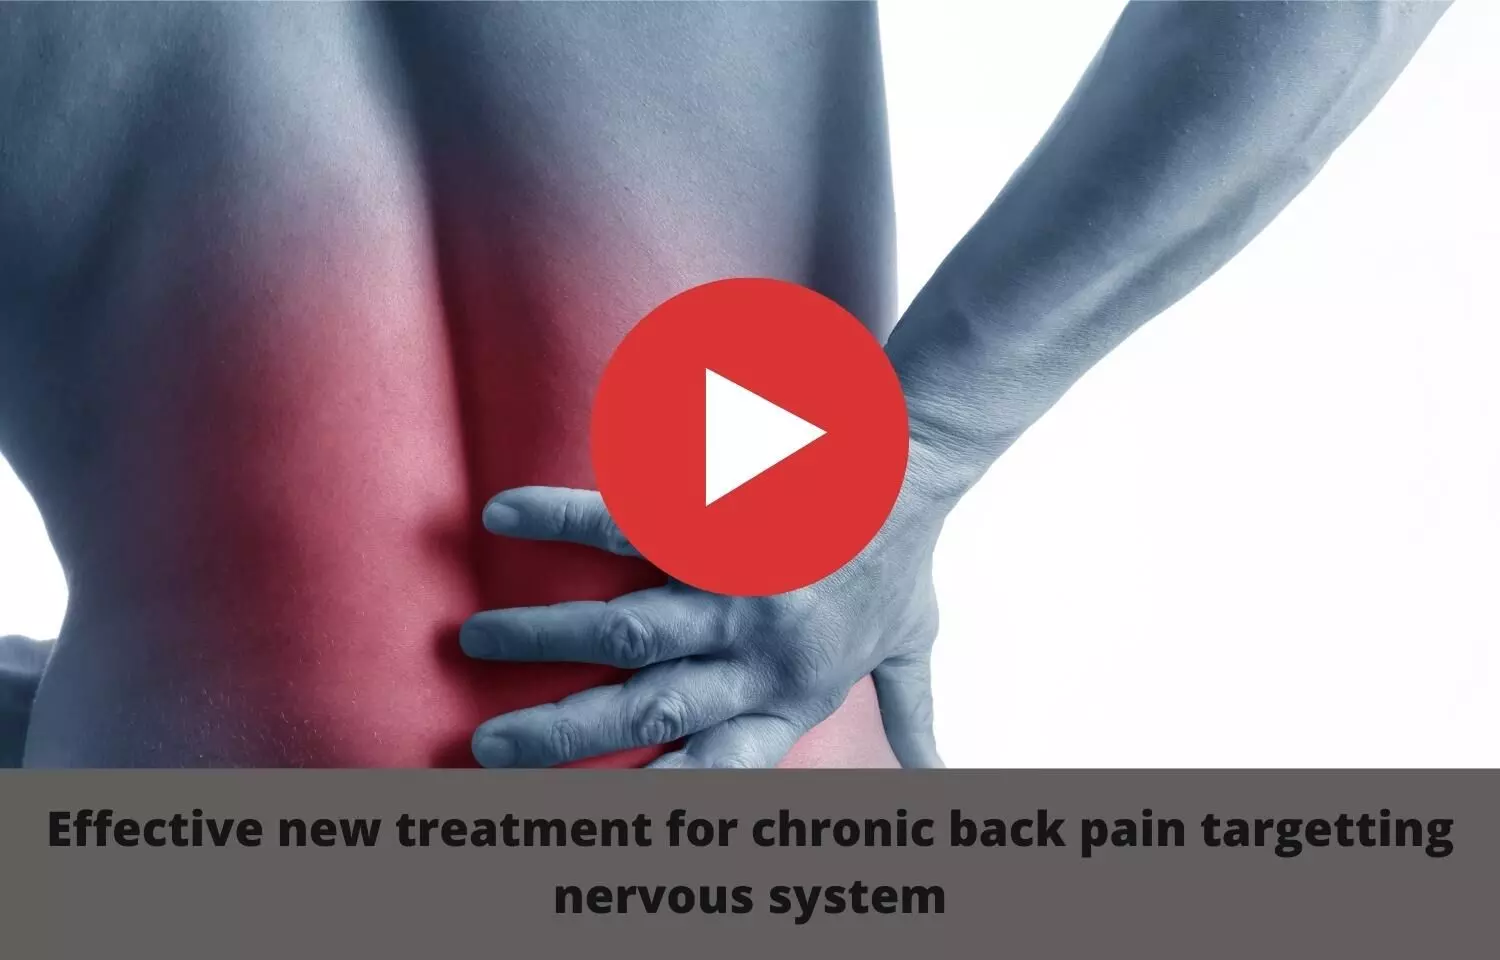 Effective new treatment for chronic back pain targeting nervous system